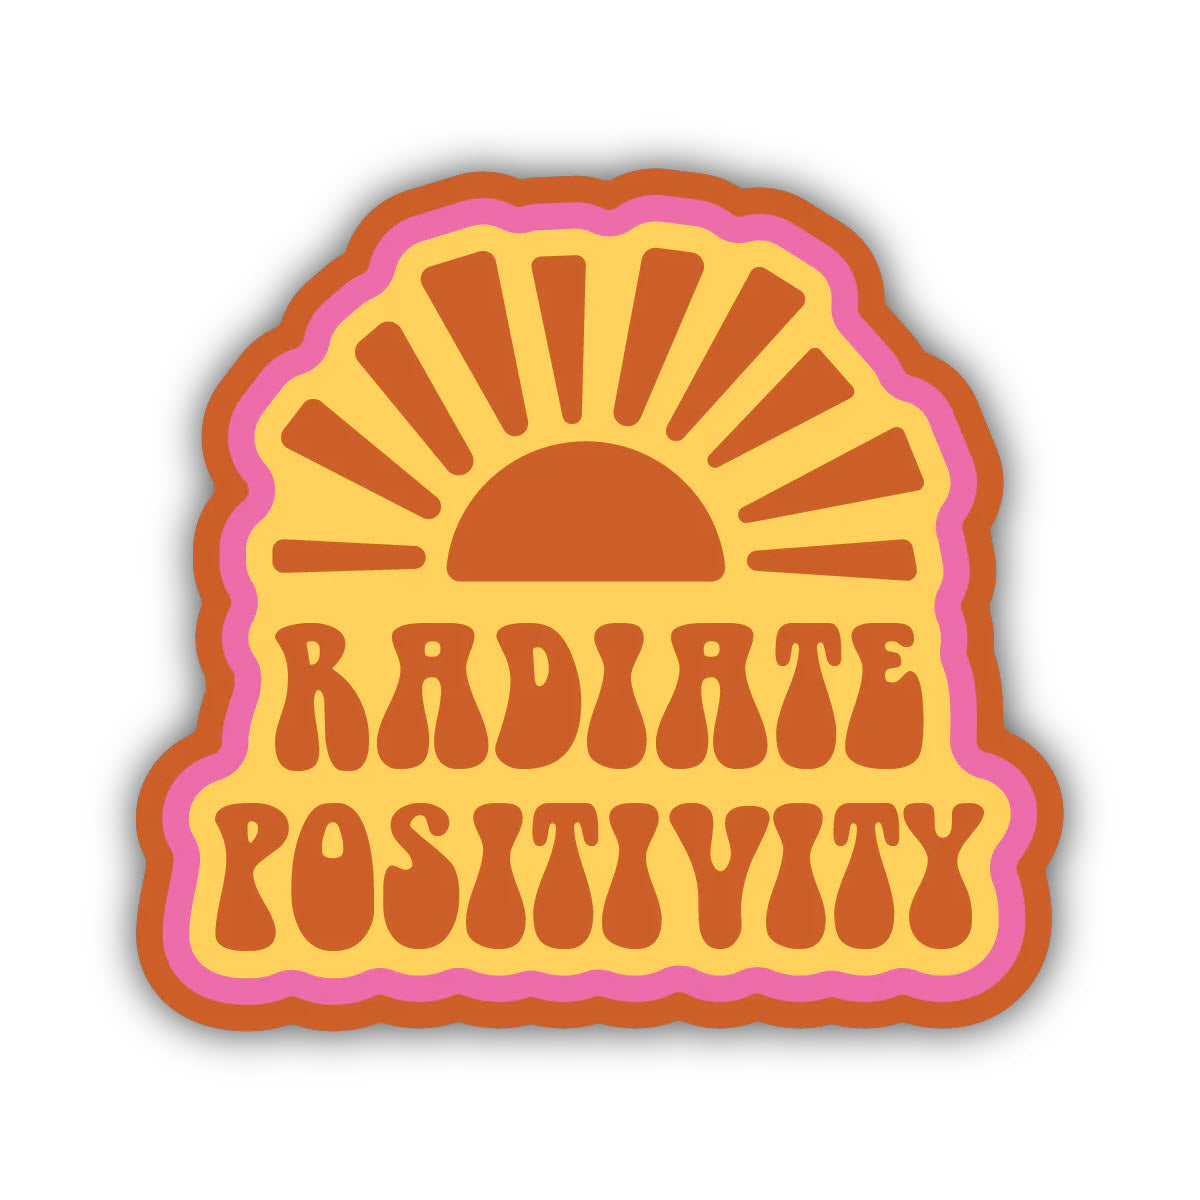 Stickers Northwest radiate positivity with a weatherproof, orange and yellow design featuring the sun and the words "radiate positivity" in bold, stylized text.